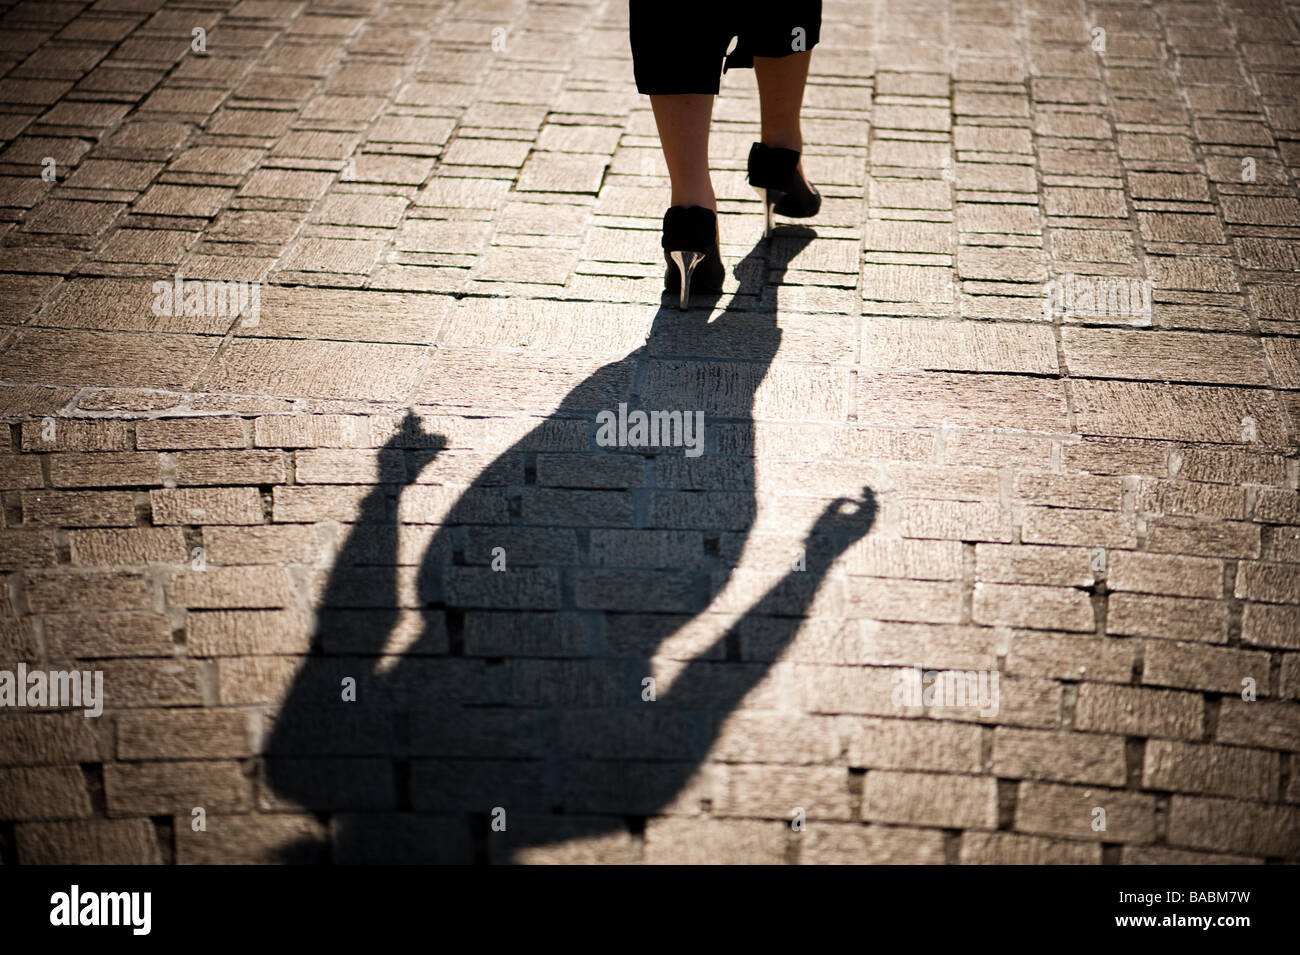 rear view of the legs feet and the shadow of a woman wearing high heels walking alone along a pavement in a city Stock Photo